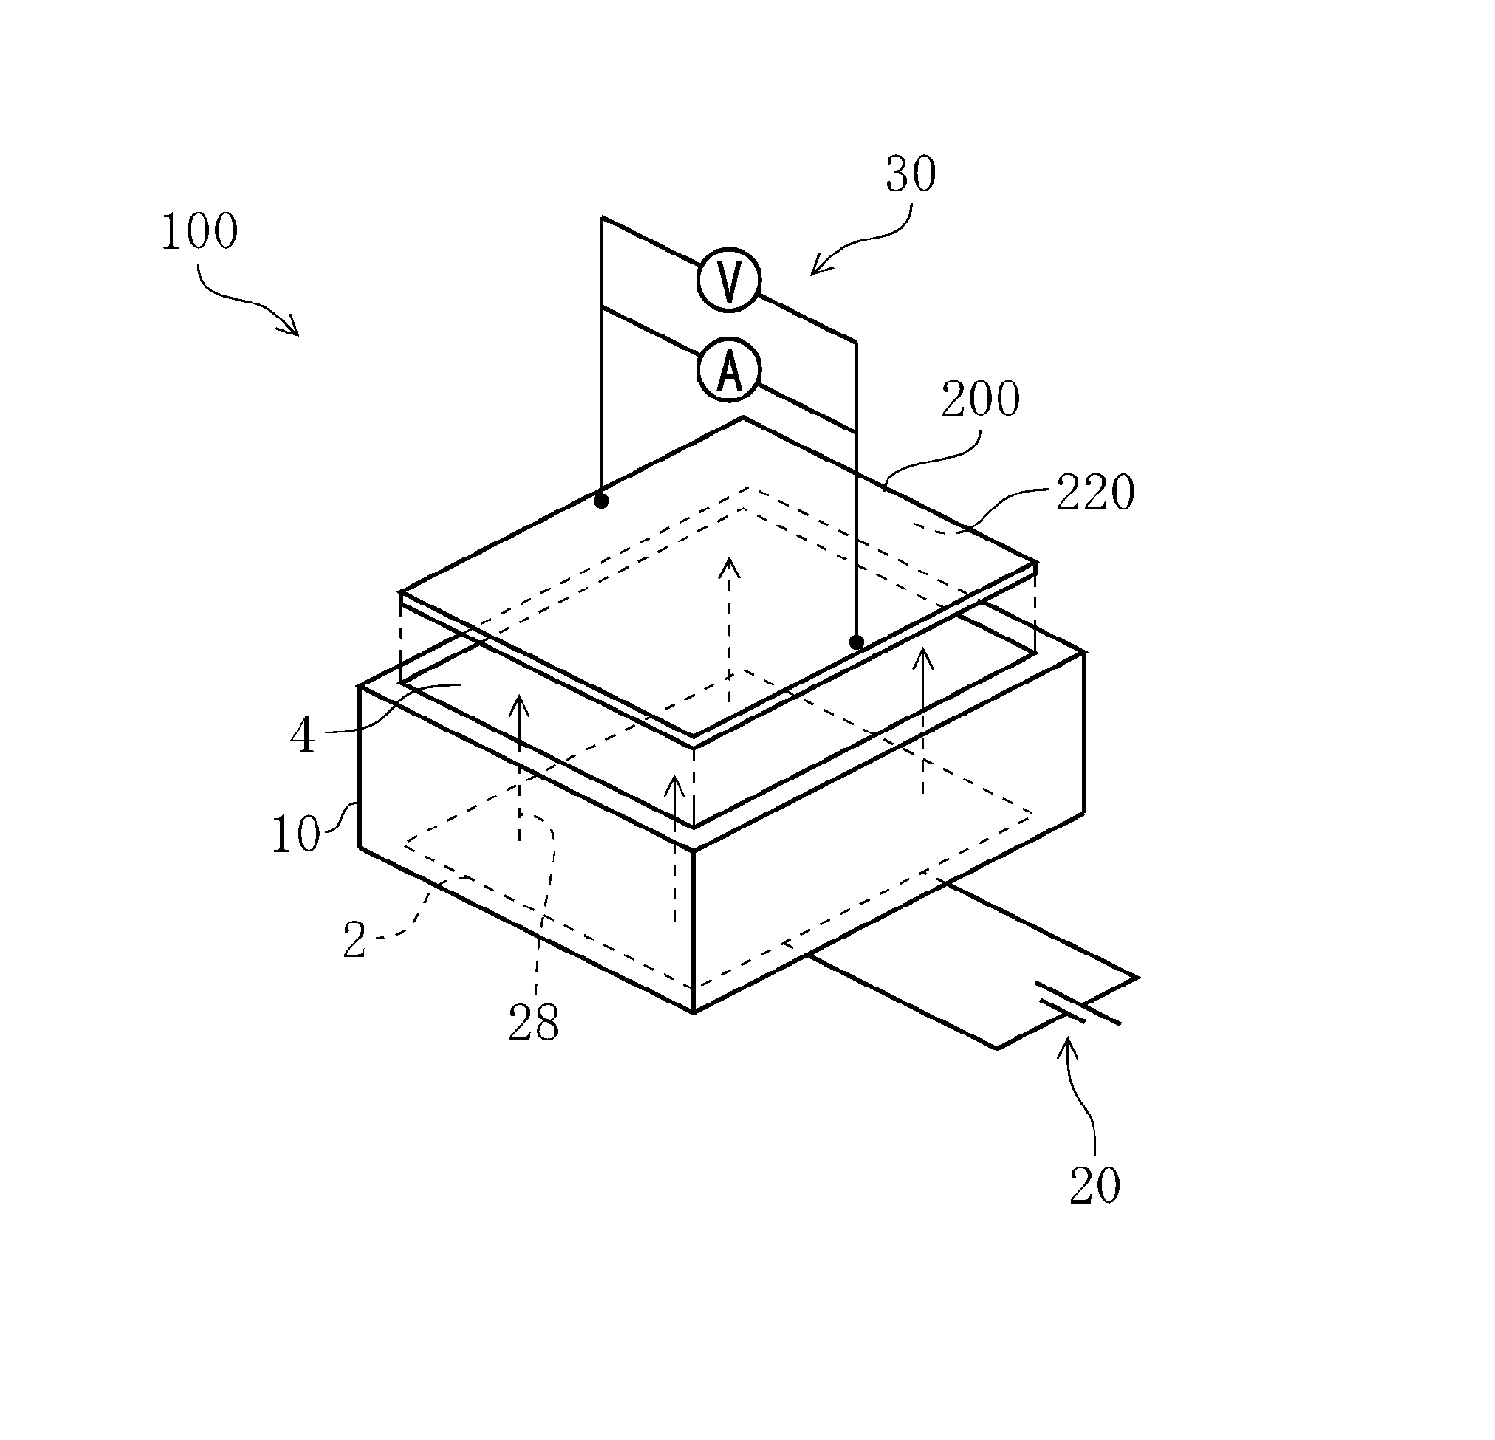 Solar simulator and solar cell inspection device